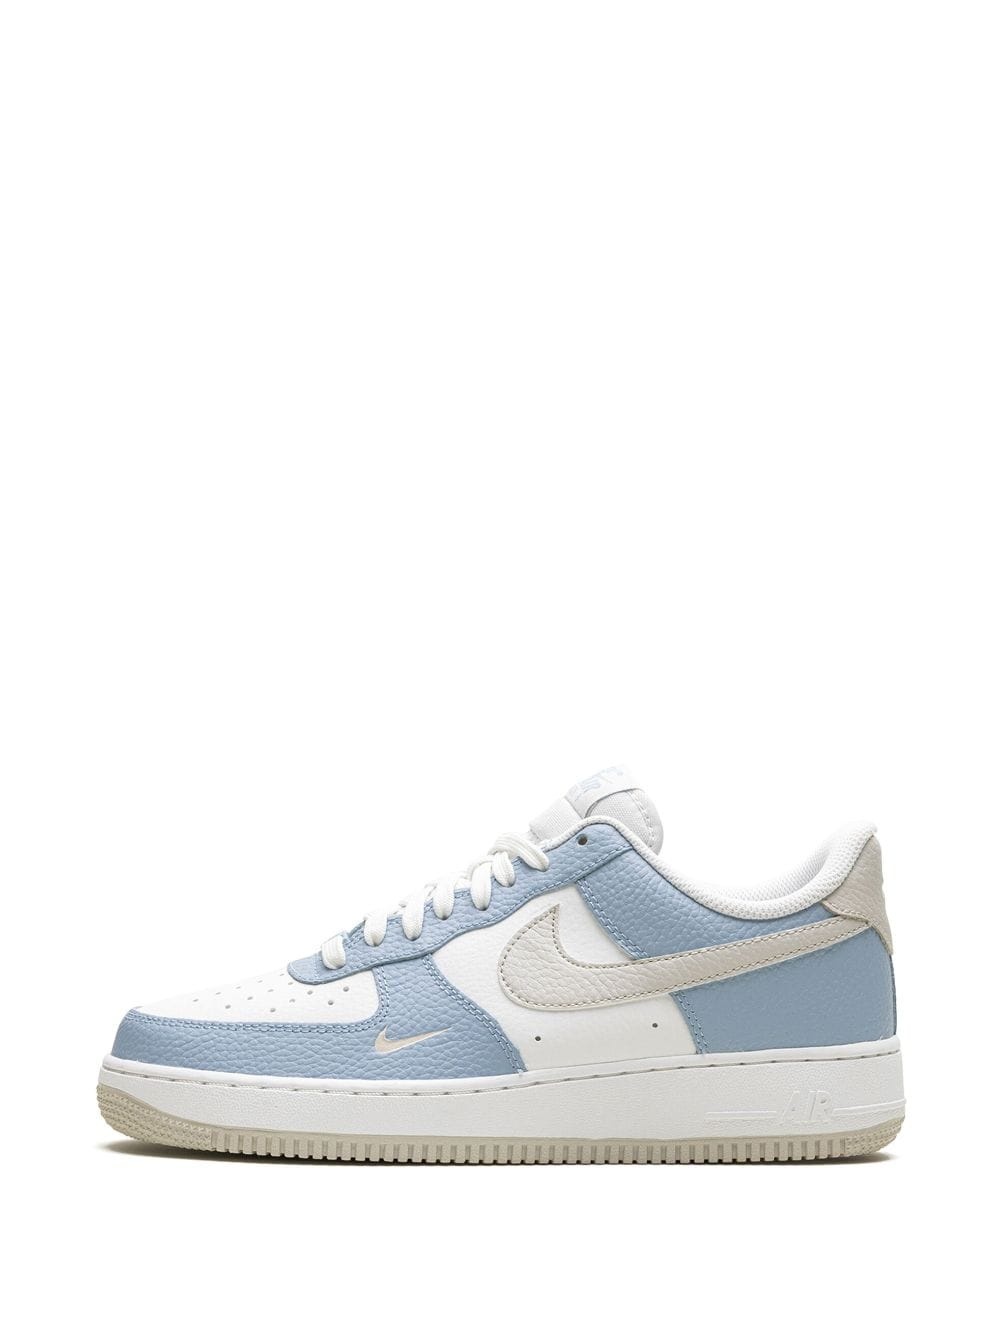 Air Force '07 "Baby Blue" sneakers - 6